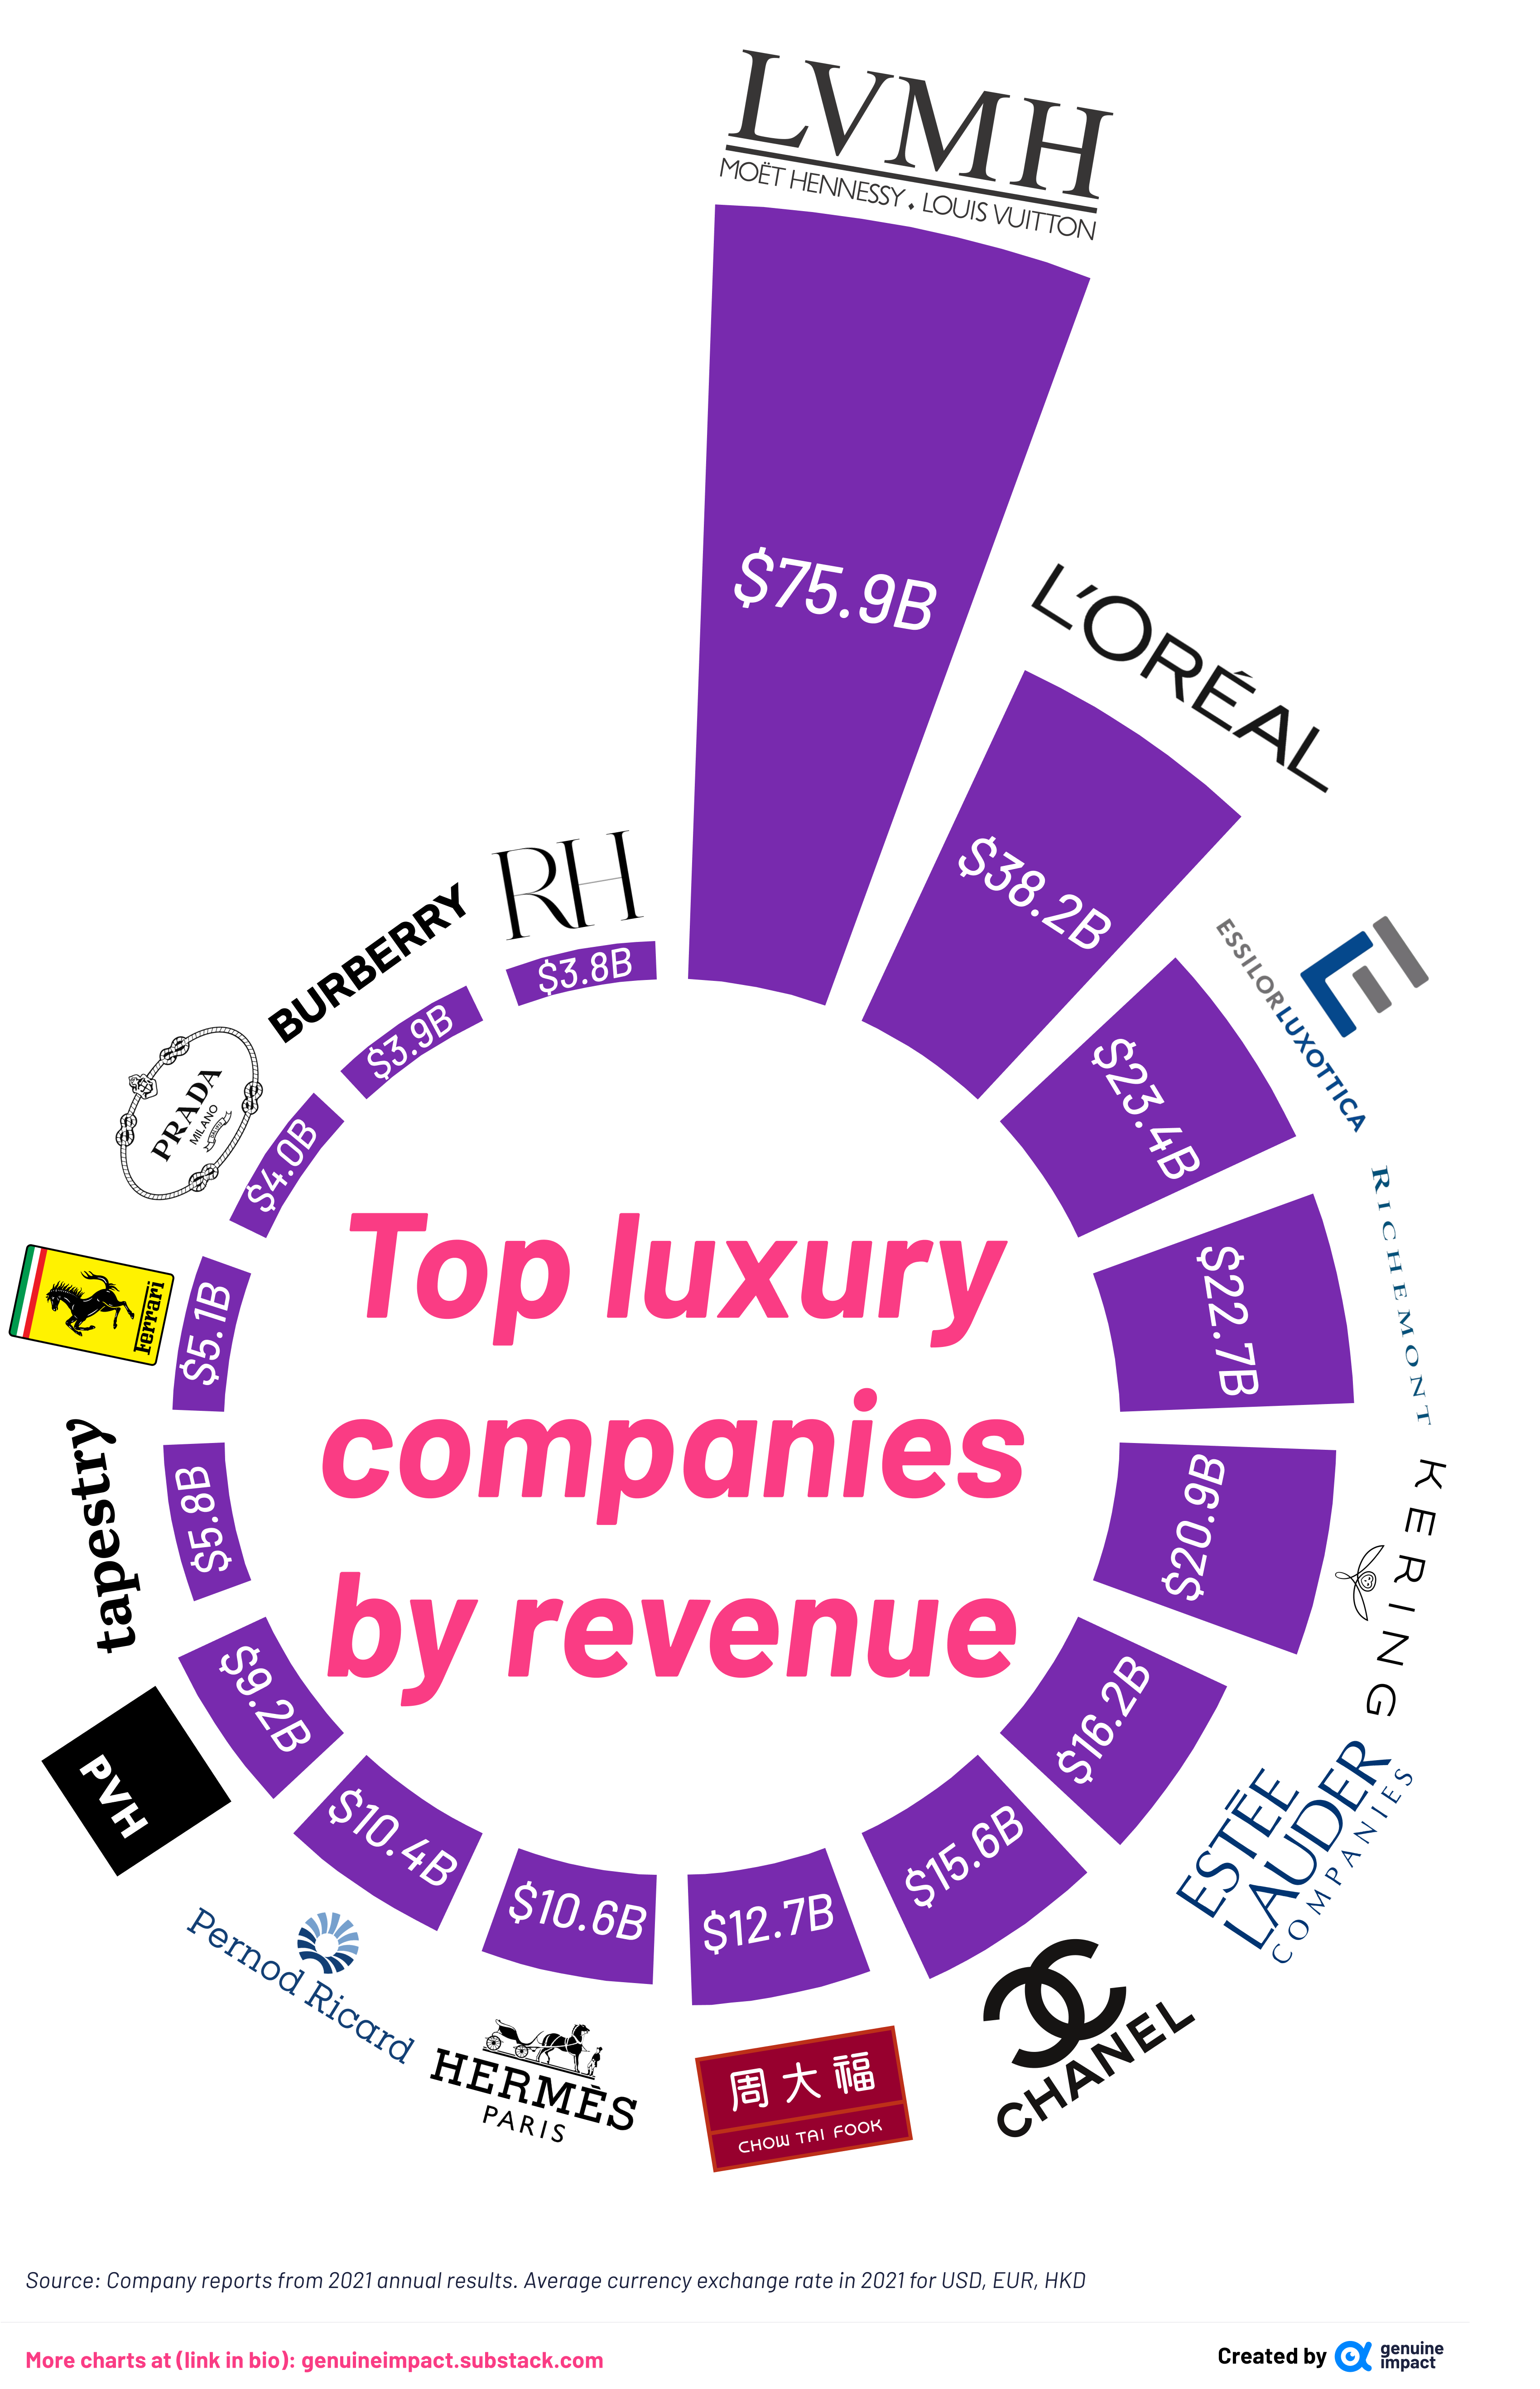 Statistics That Matter 🌐 on X: World's largest luxury companies 1. #LVMH  2. #Kering 3. #Richemont 4. Luxottica 5. Swatch Group 6. Signet Jewelers 7.  Hermès 8. Tiffany & Co. 9. Coach